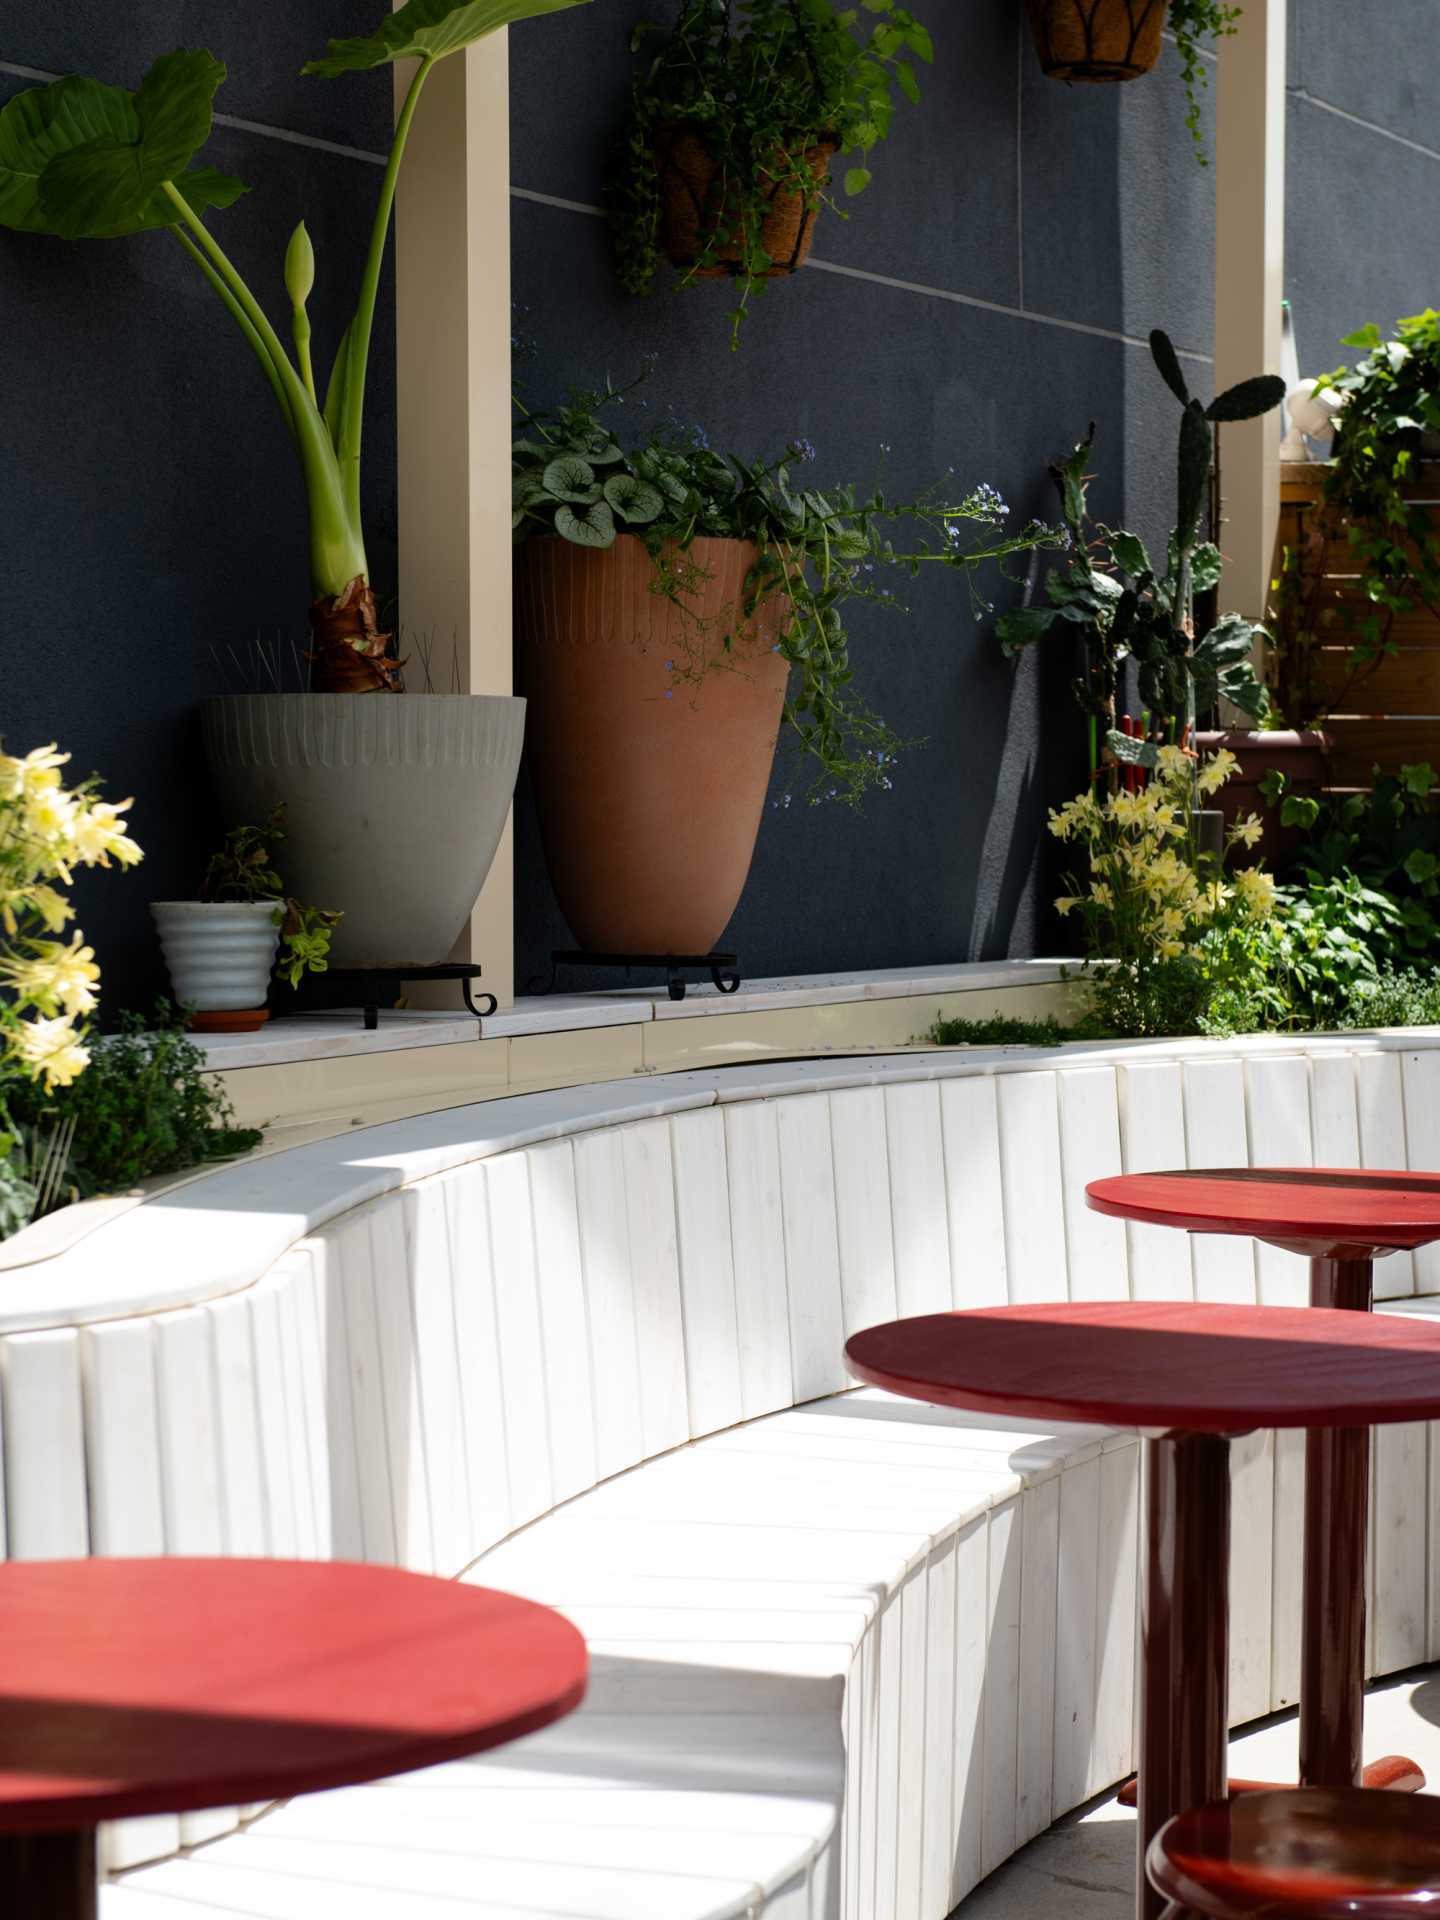 Toronto bottle shops and alcohol stores | The new bench patio at Grape Witches on Dundas West